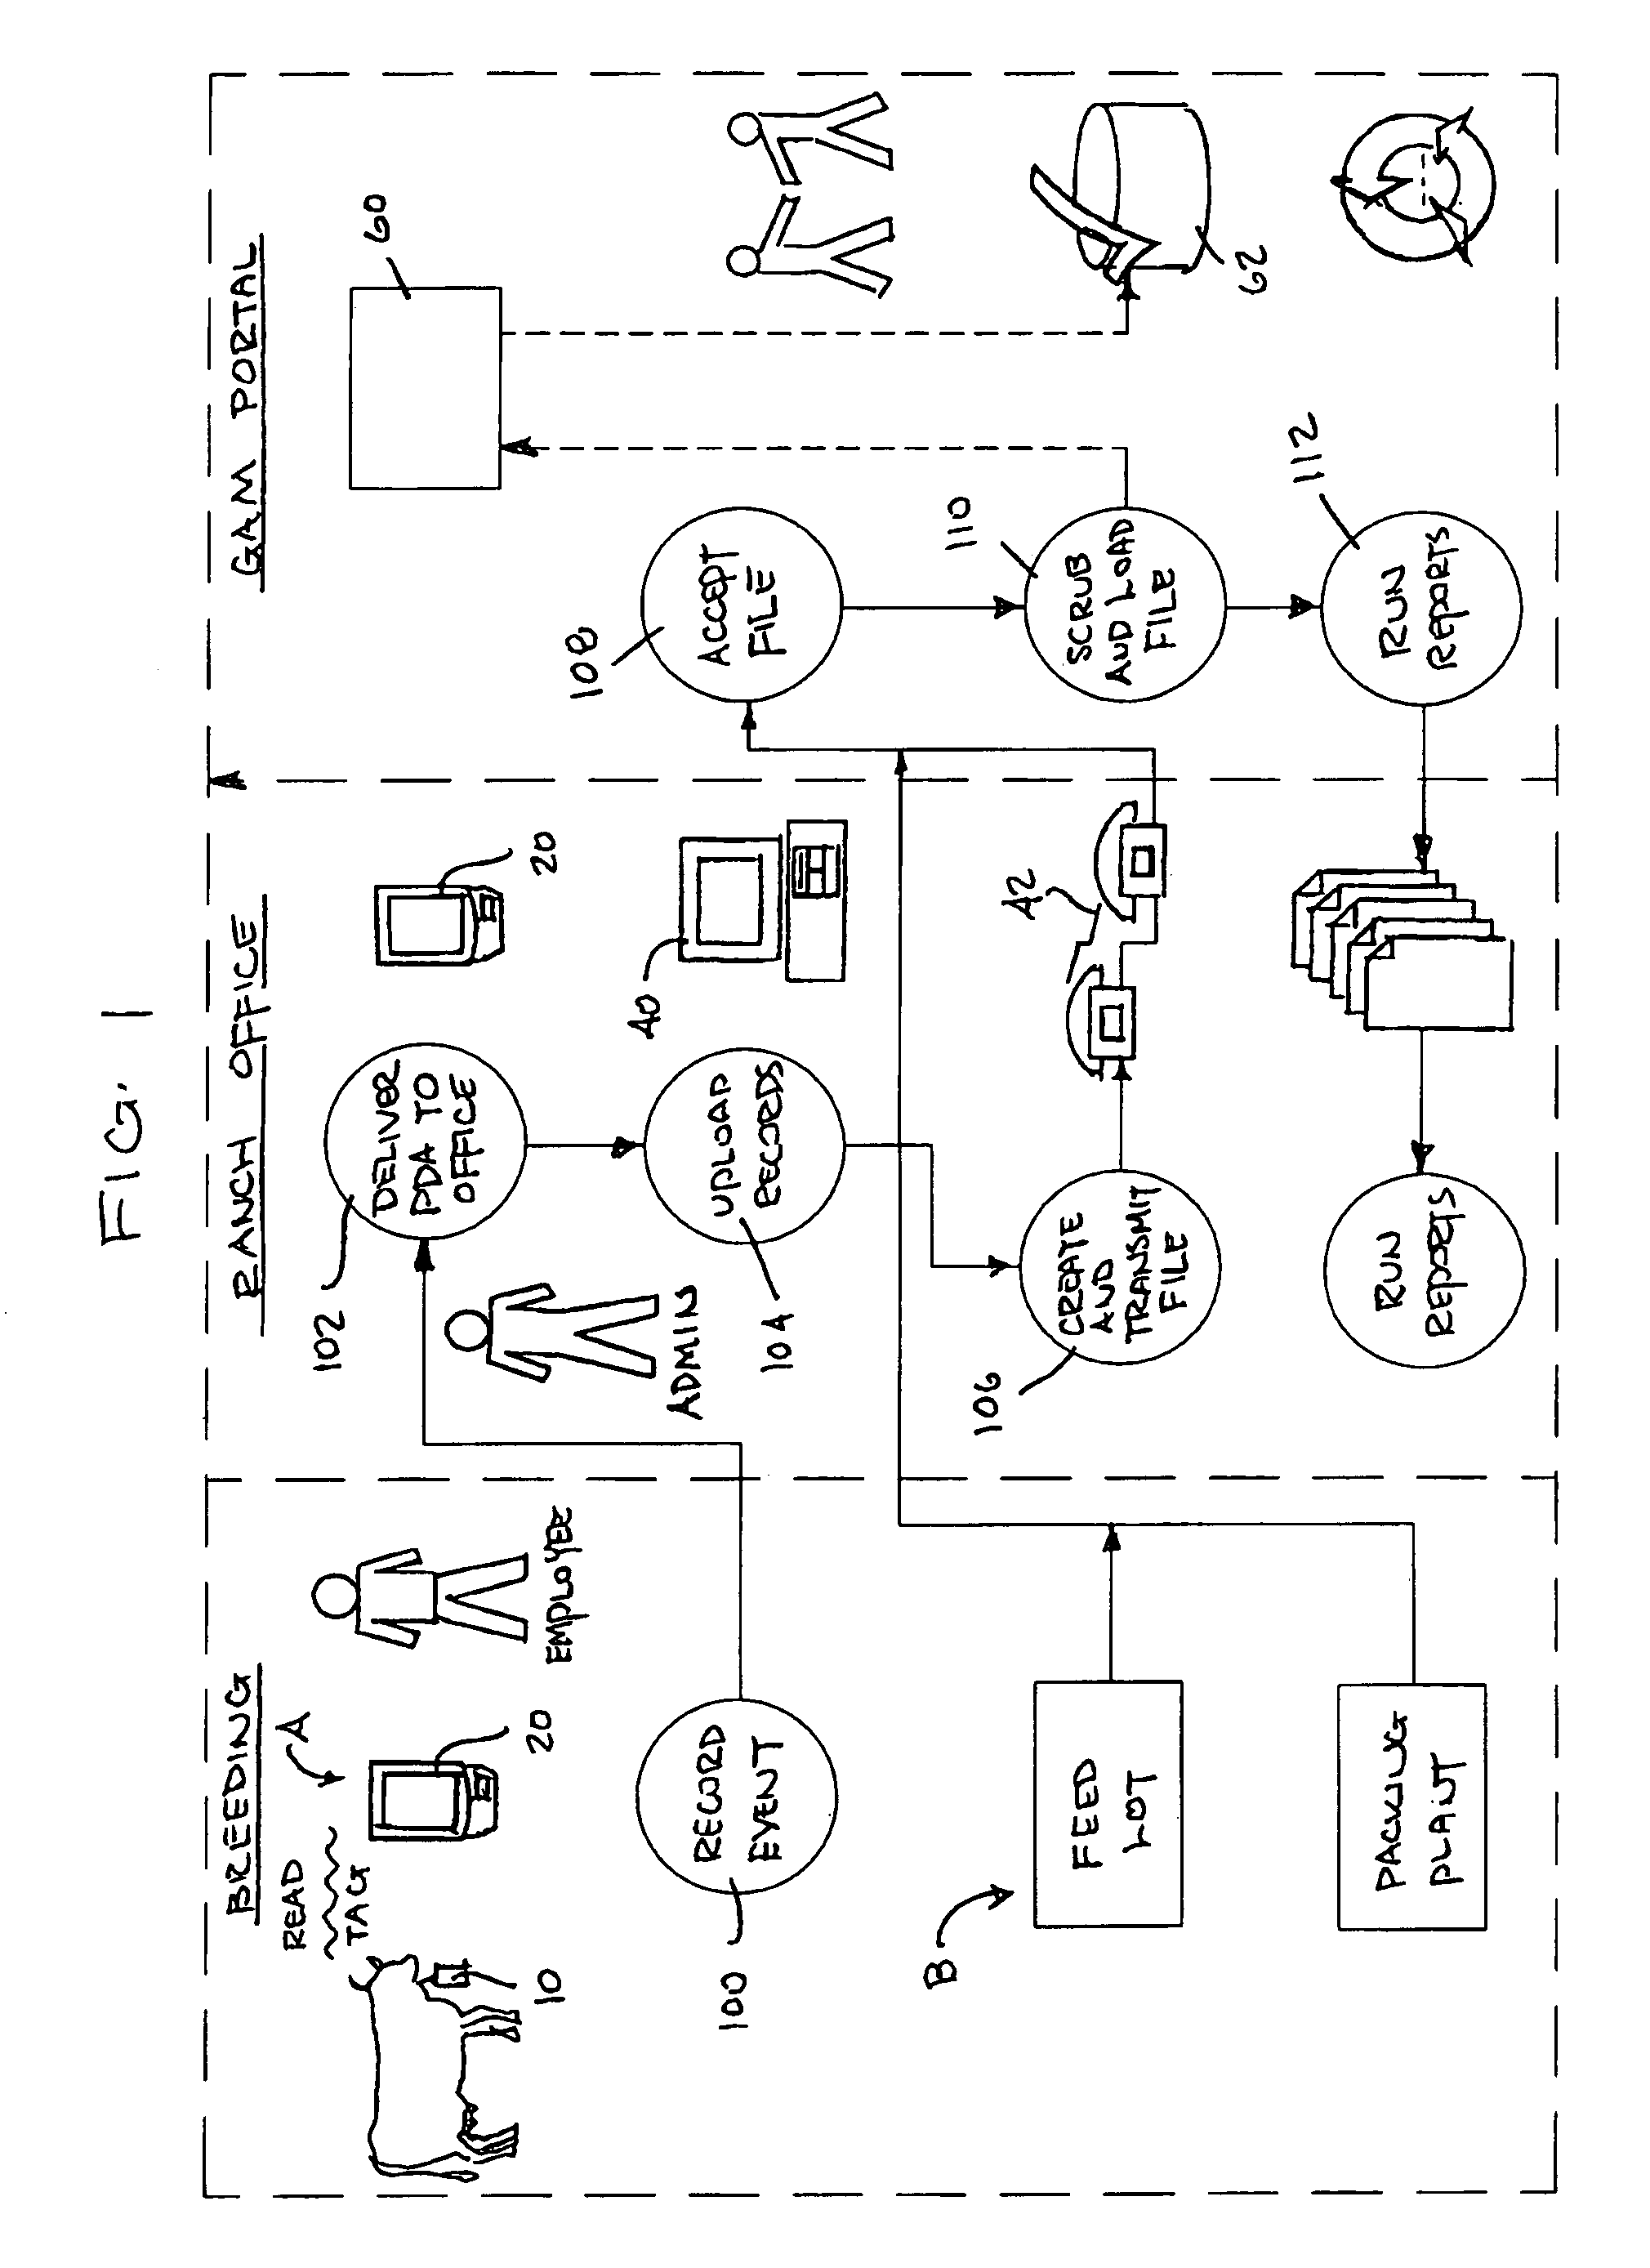 System and method for collecting, processing and managing livestock data